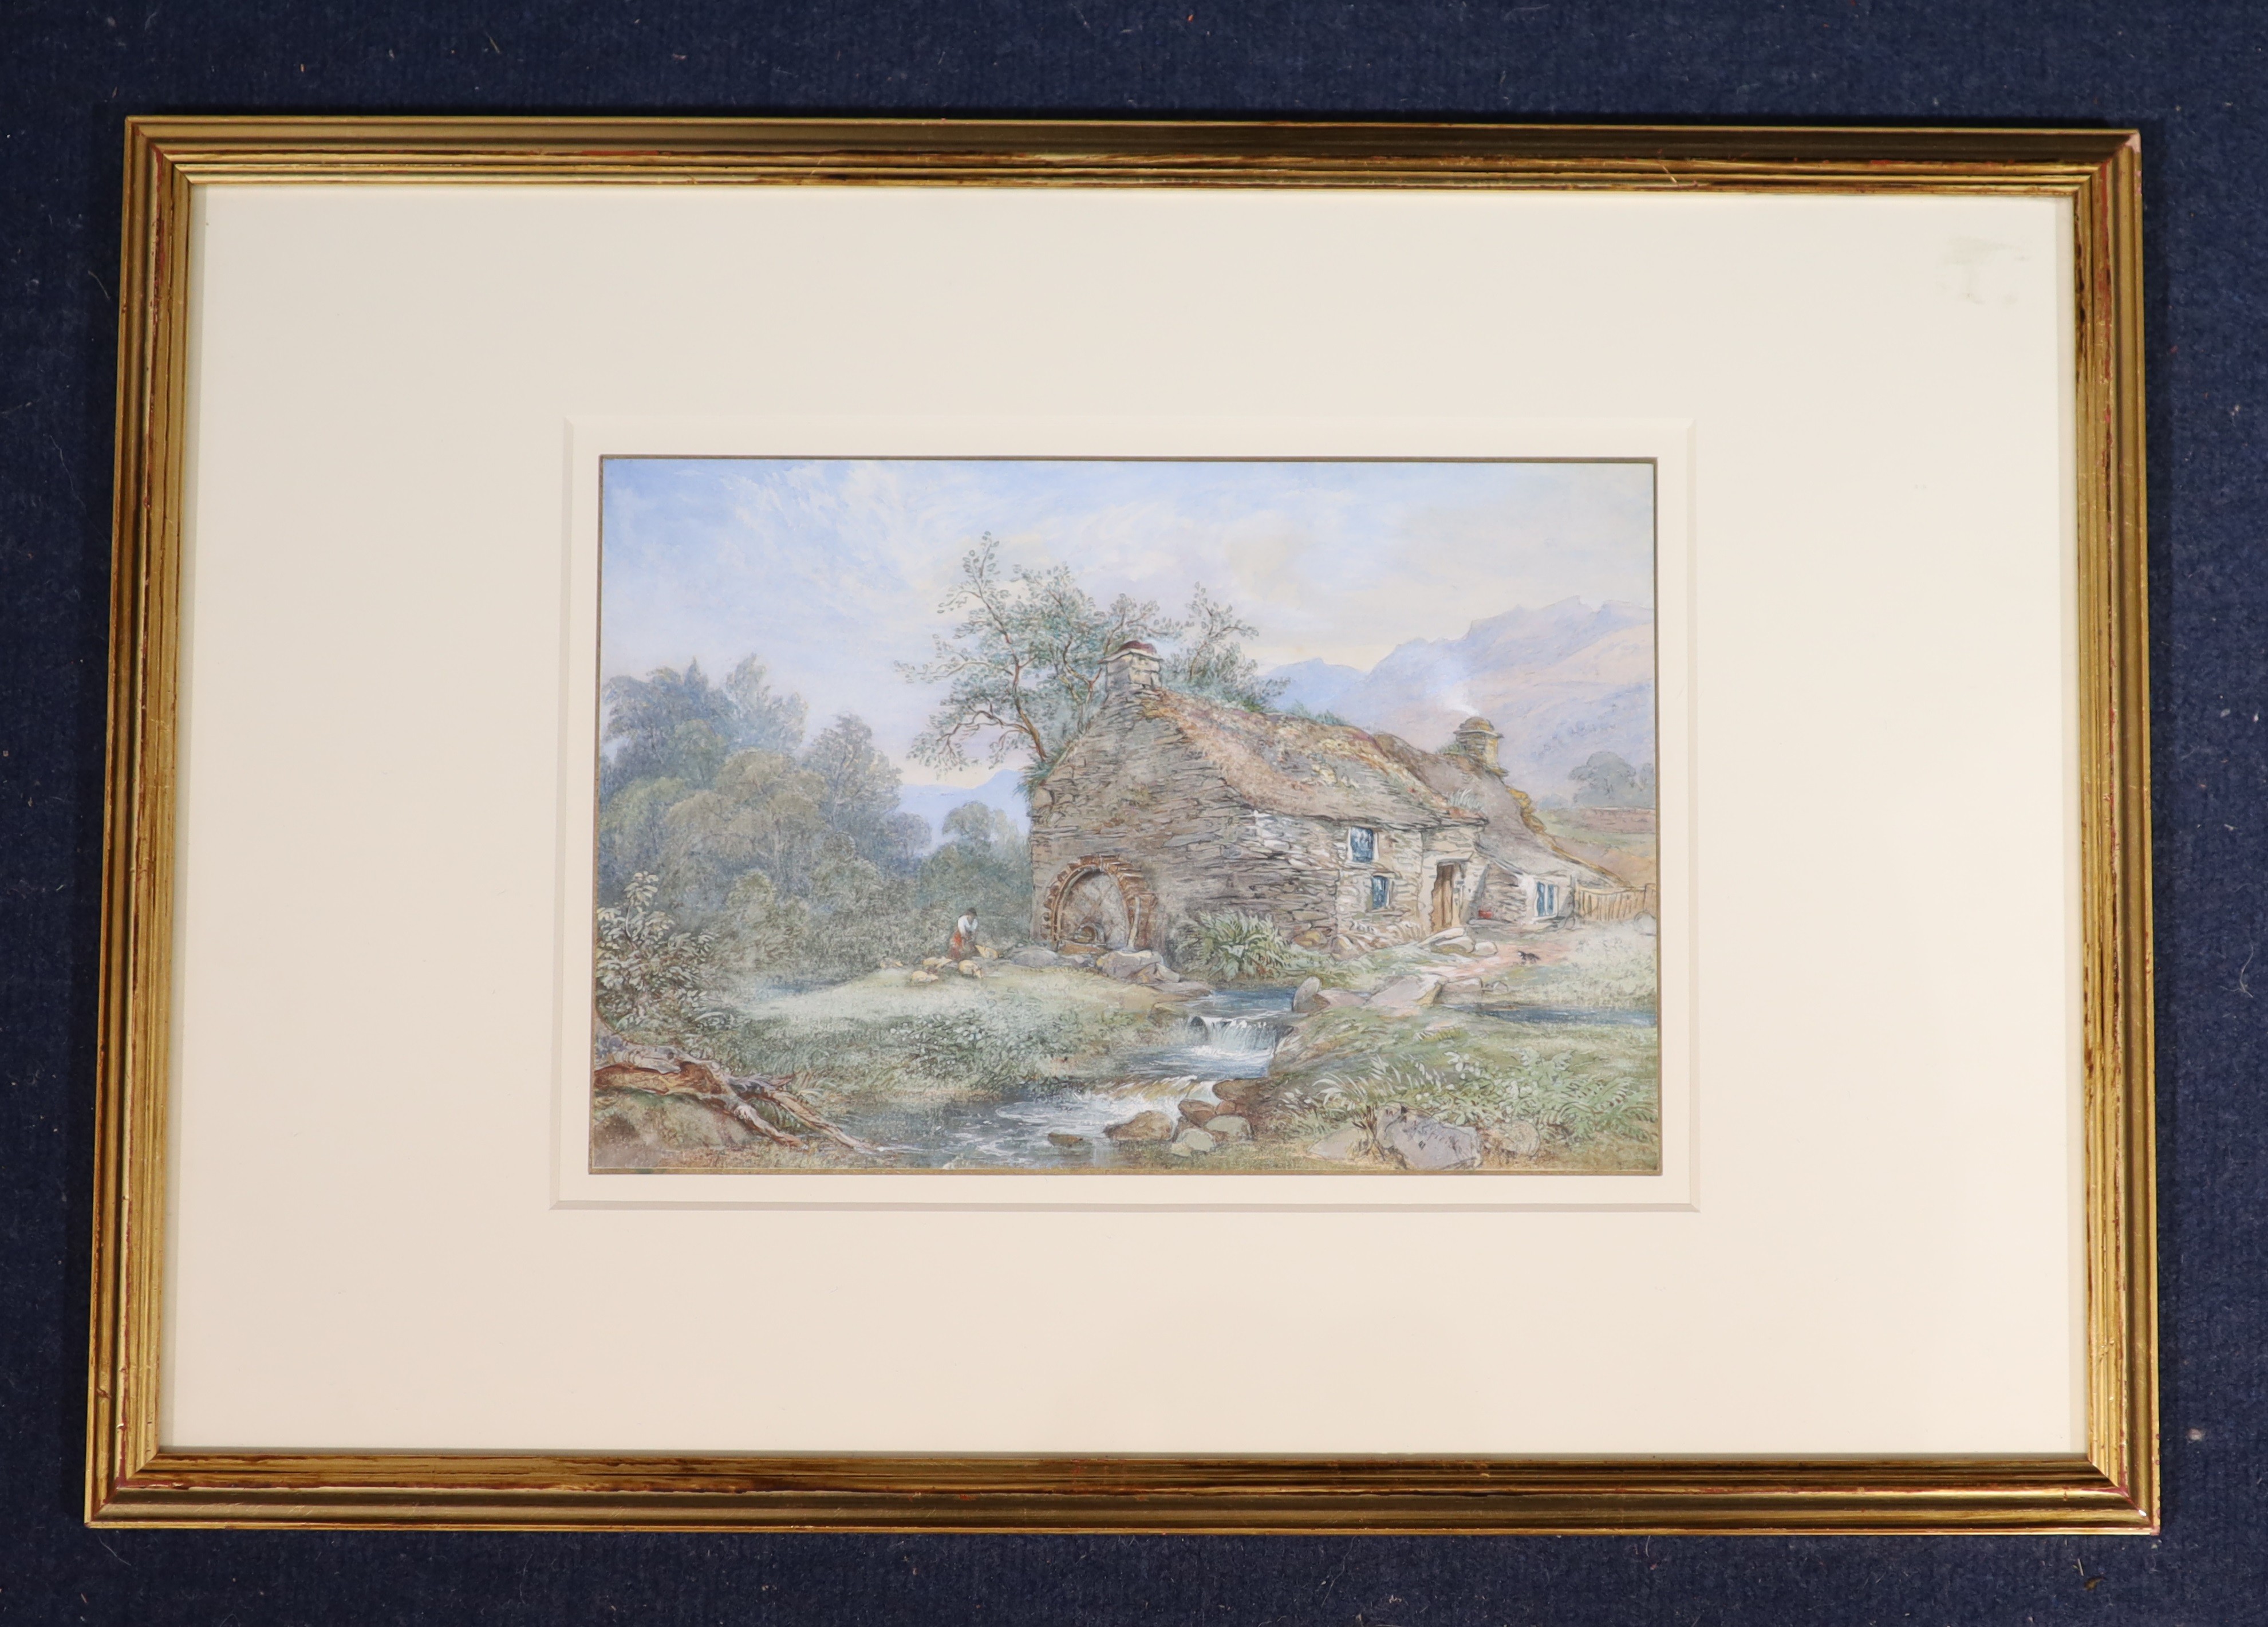 William Andrews Nesfield (1793-1881), An Old Mill near Betws y Coed, watercolour, 18.5 x 28cm.